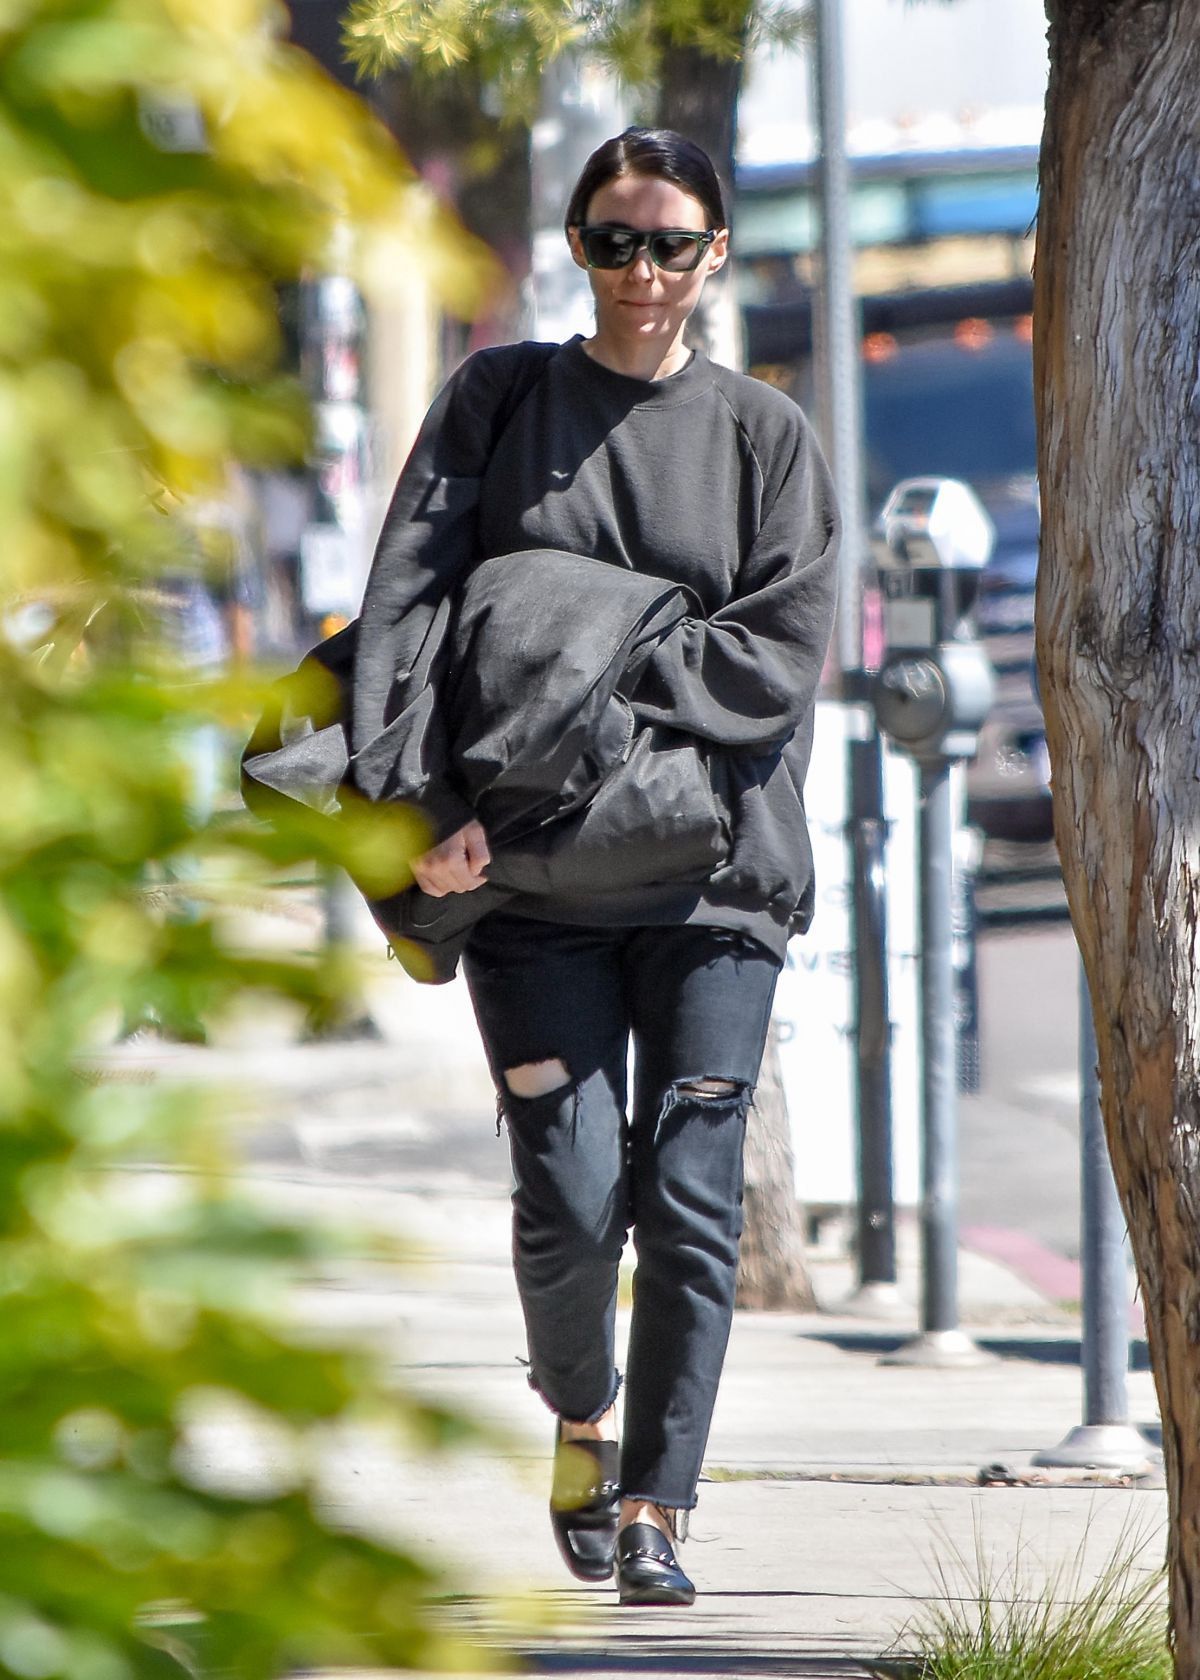 ROONEY MARA Out and About in Los Angeles 03/27/2018 – HawtCelebs